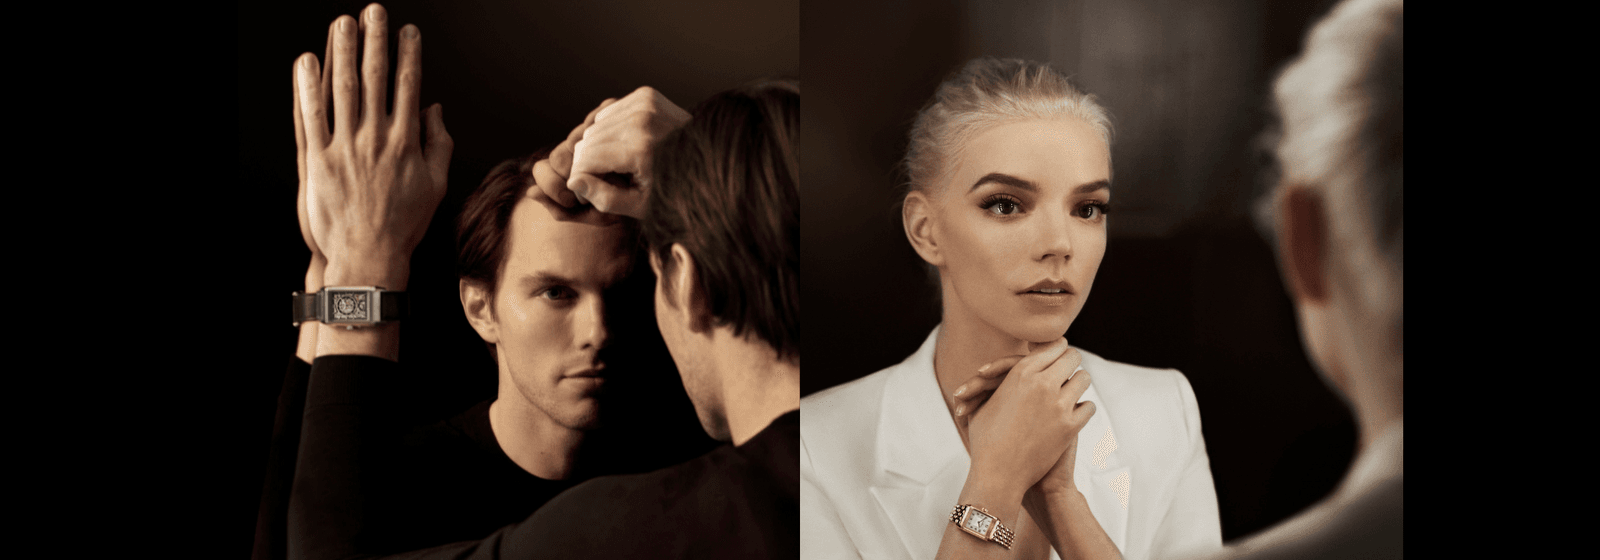 Jaeger-LeCoultre's Manifesto Of Excellence Film Stars Nicholas Hoult and Anya Taylor-Joy